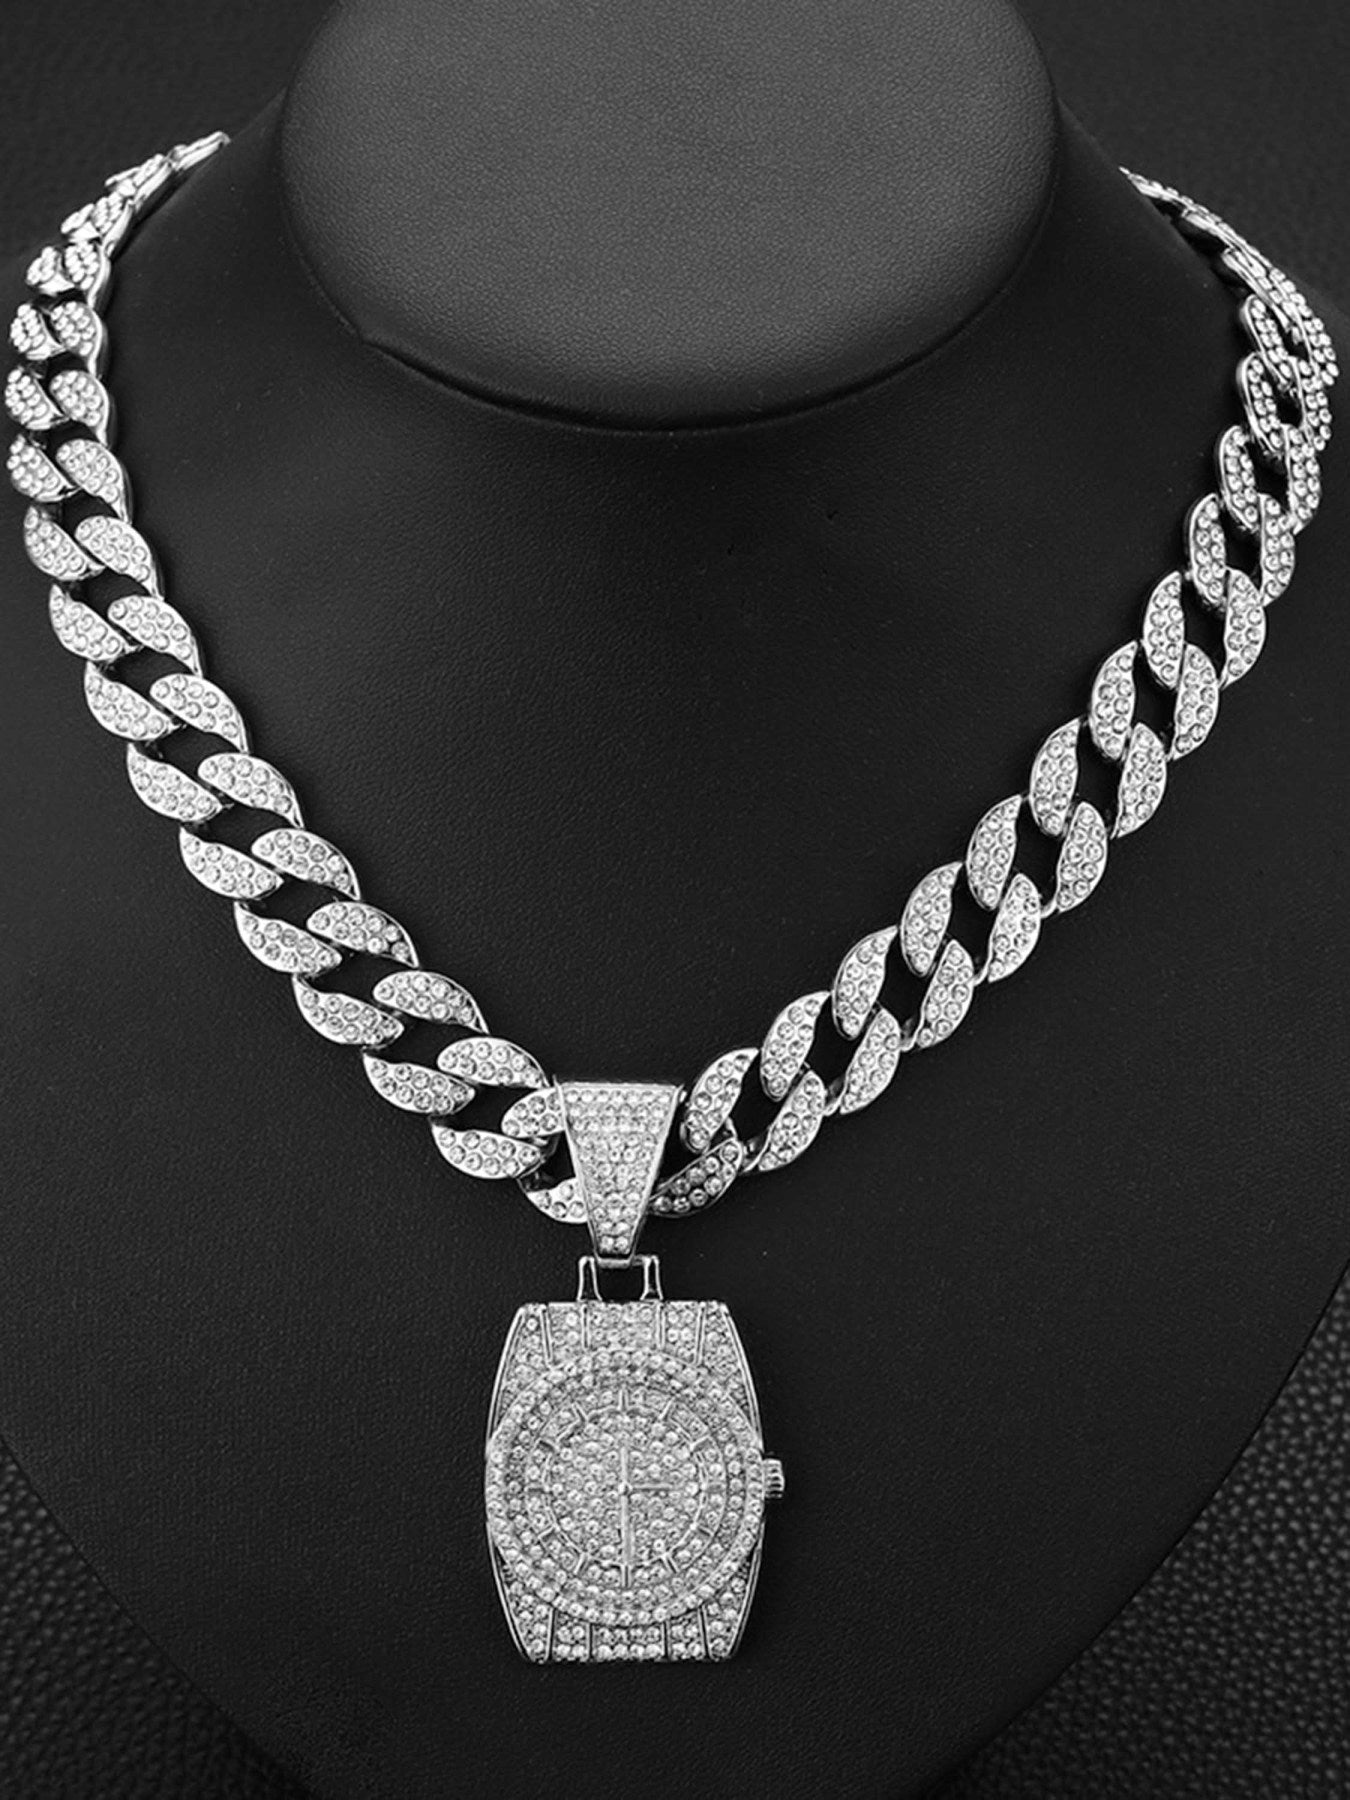 Thesupermade Hip Hop Vintage Full Diamond Necklace